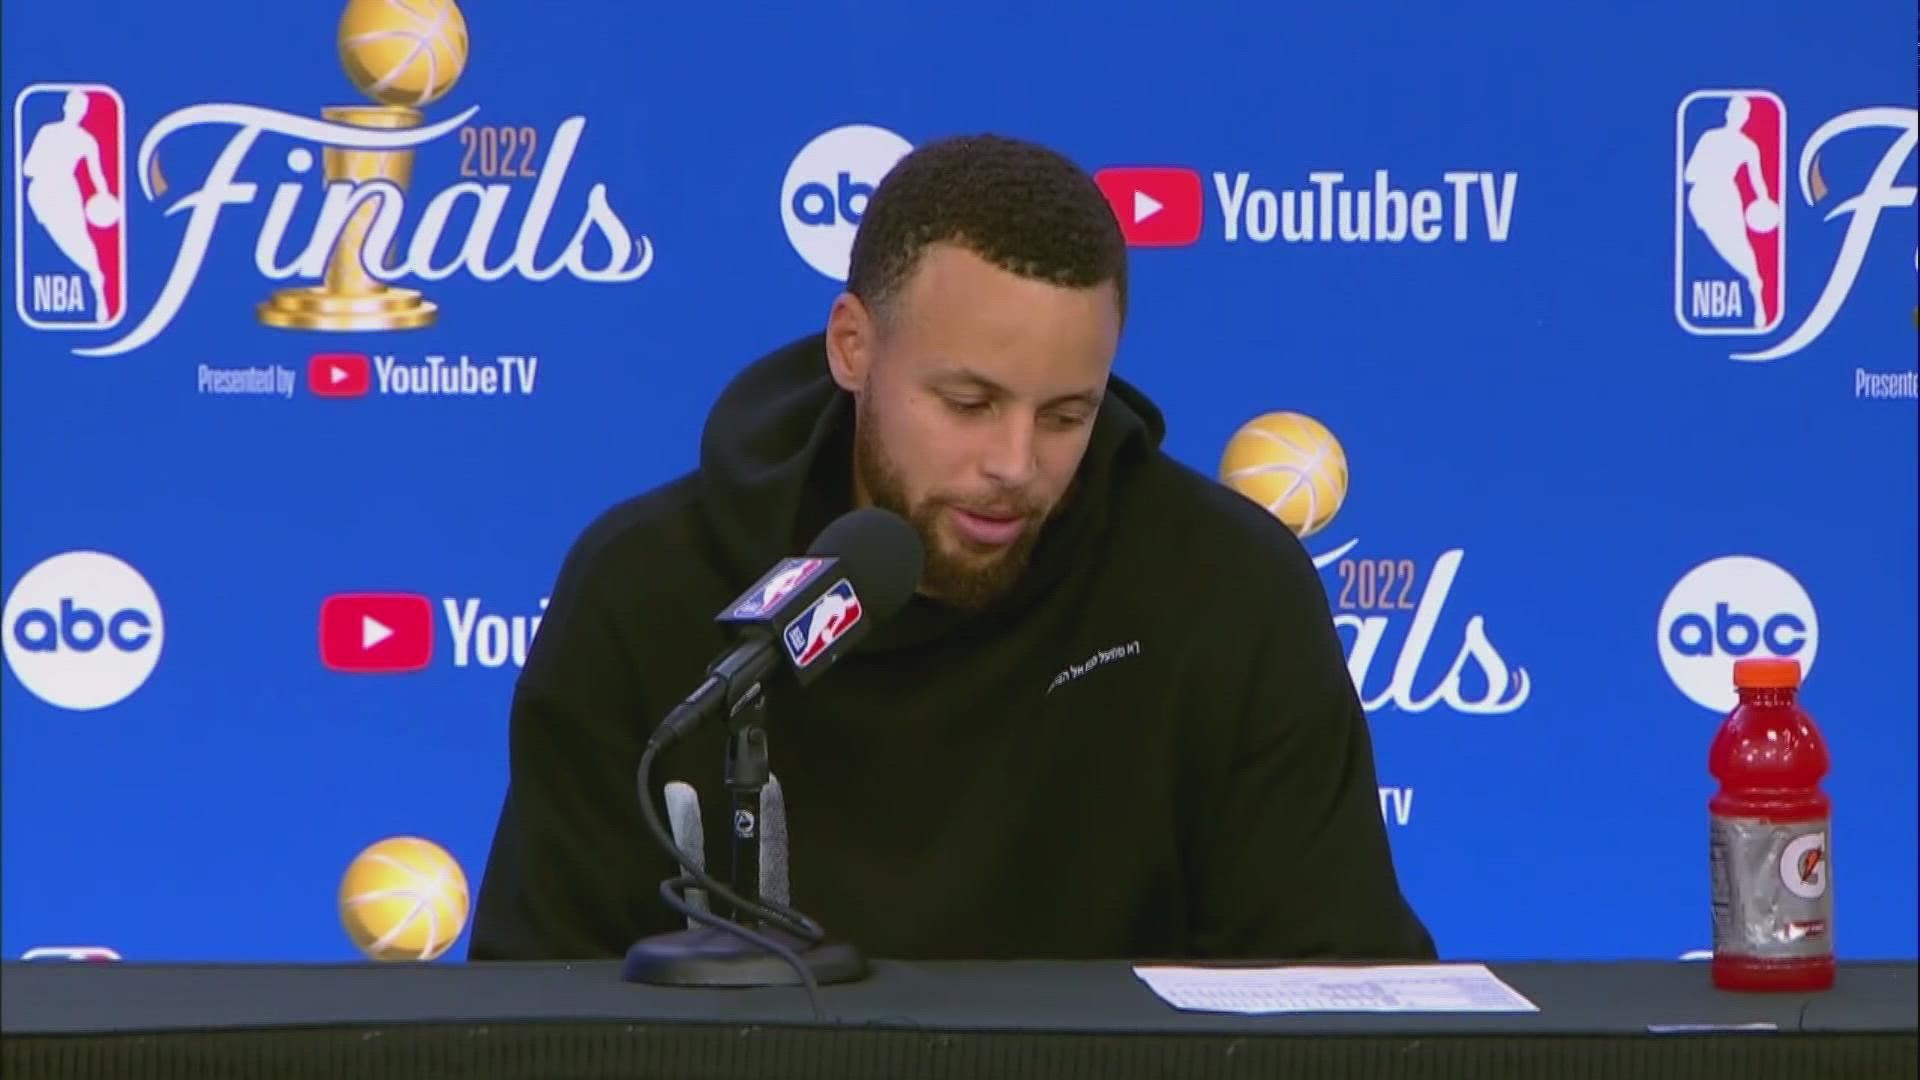 Golden State Warriors' Steph Curry talks about the pressures of Game 4 and how the First Quarter set the tone for their double-digit win.